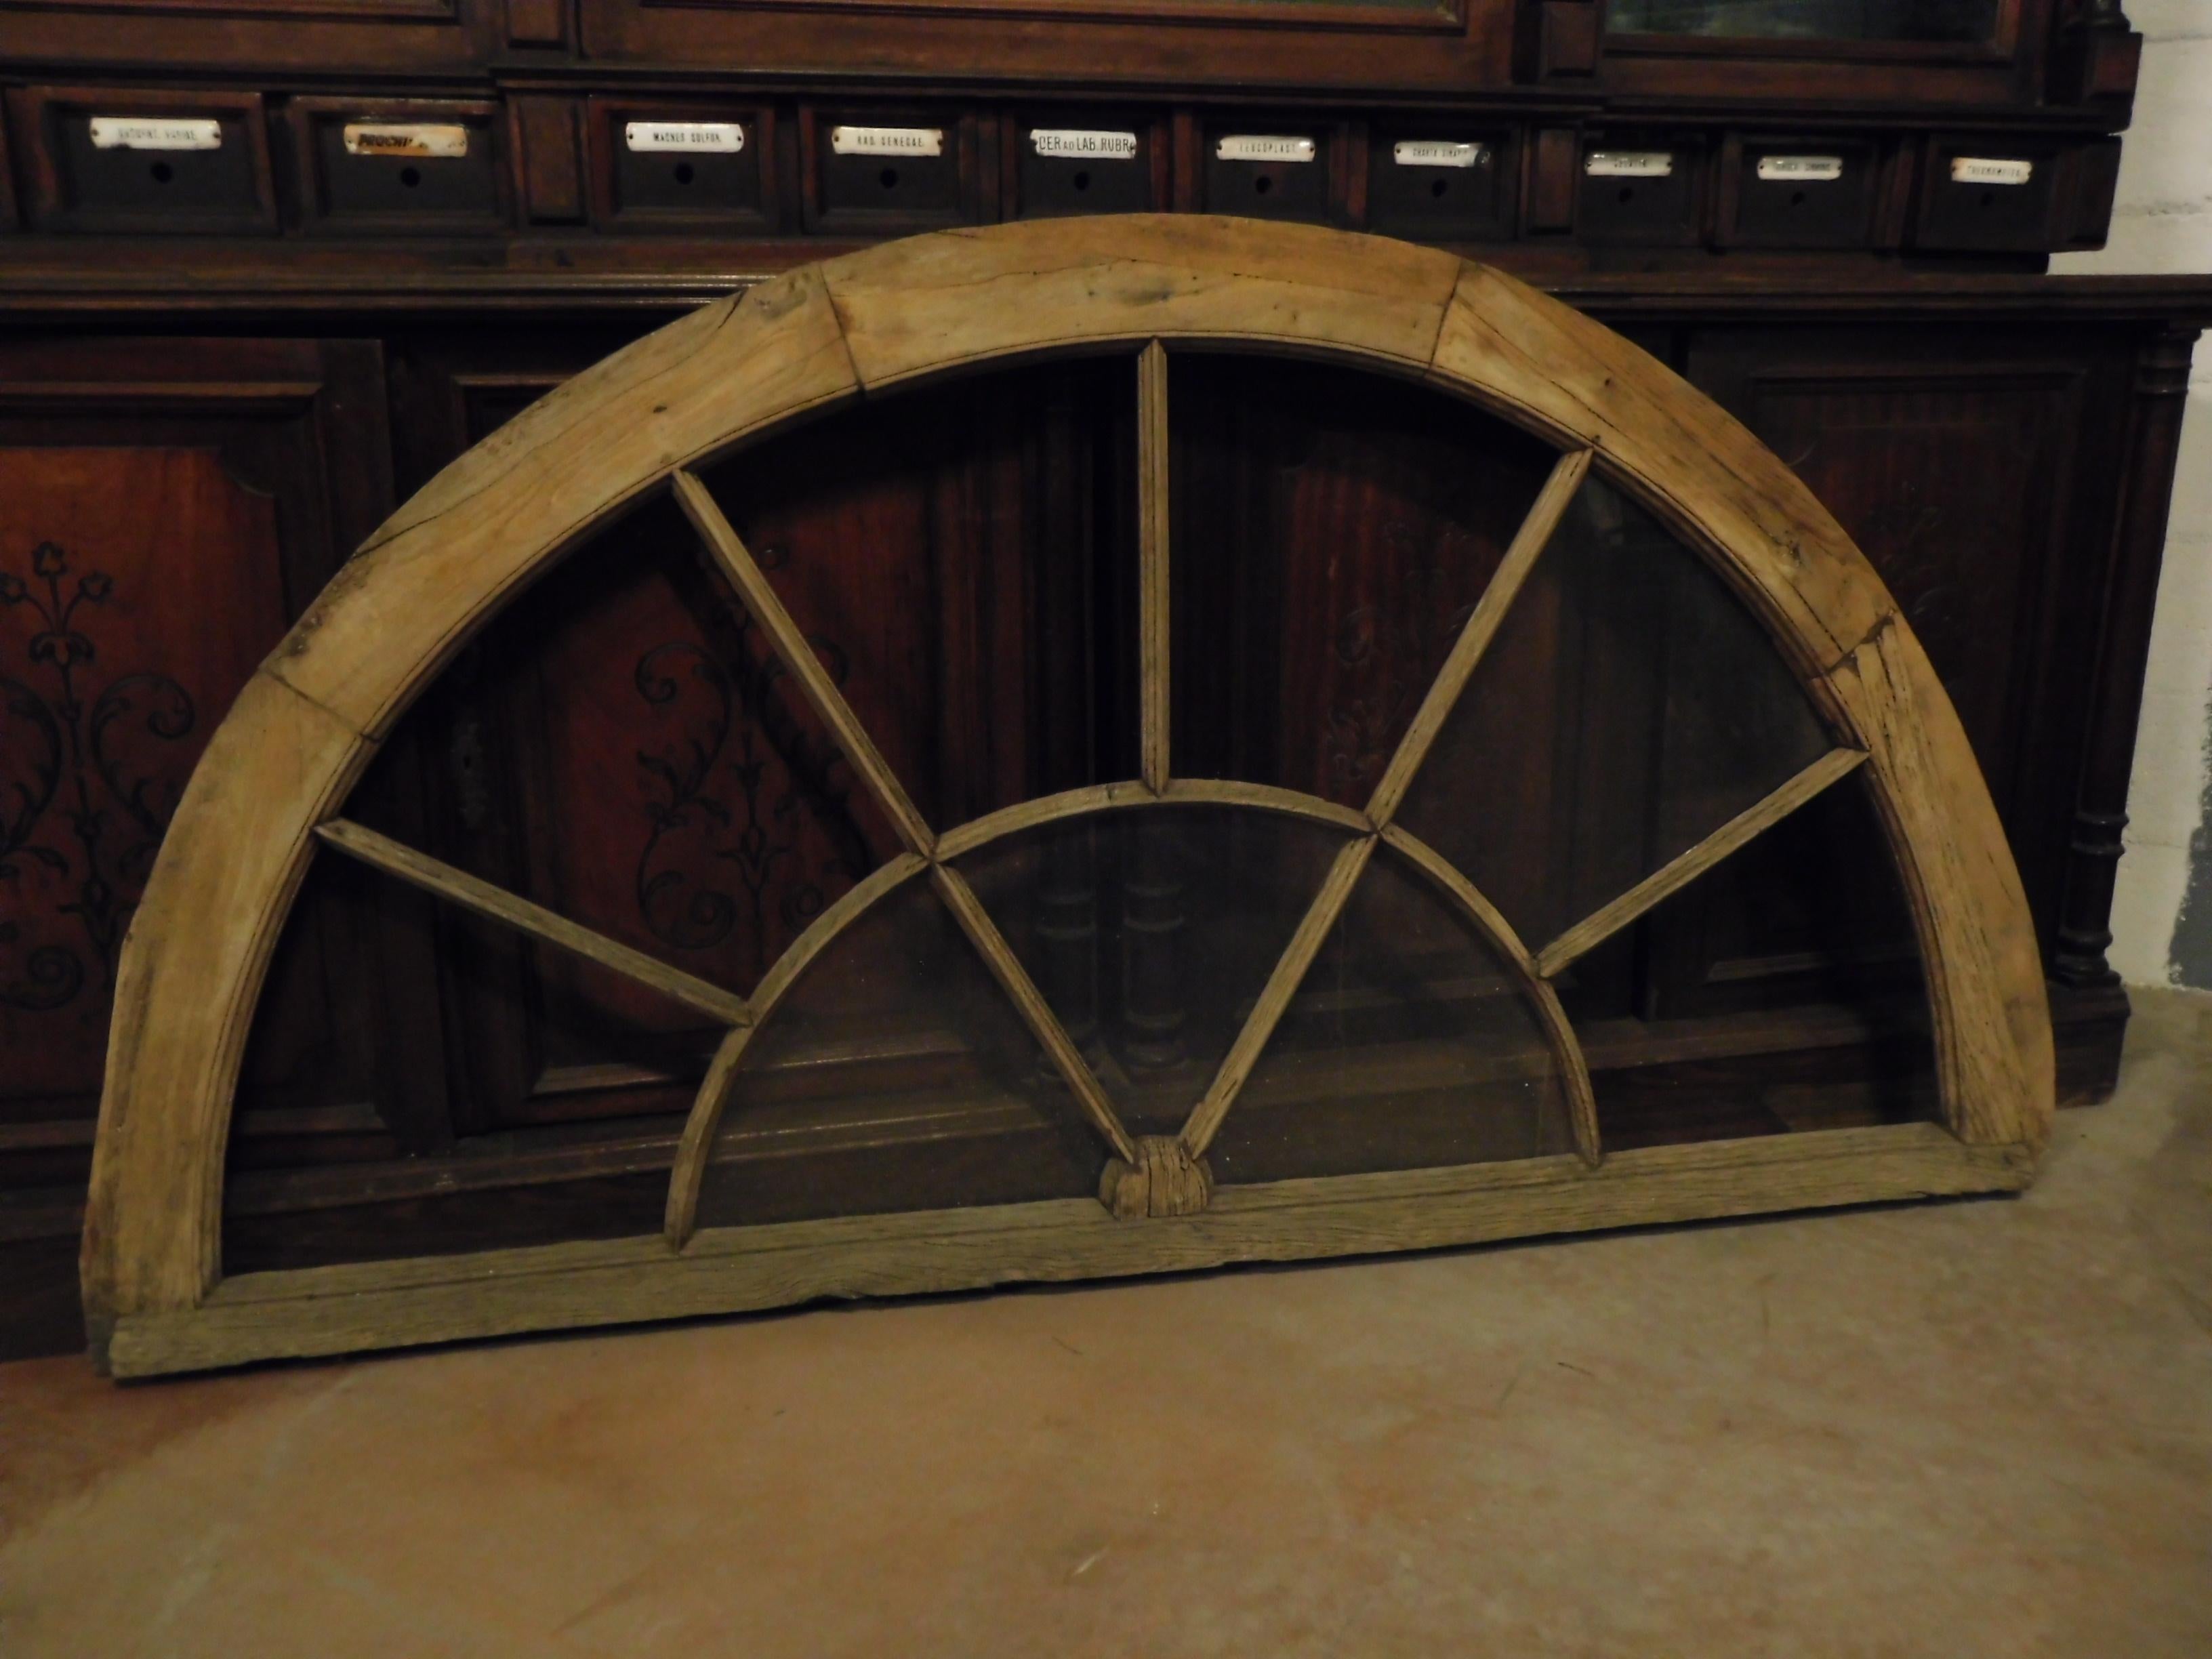 Old glazed rib, wooden over door lunette, suitable for giving light to doors or entrances, will be sold without glass for transport and the excellent price, built in the mid-1900s in Italy.
It can also be used for imaginative uses as a headboard or